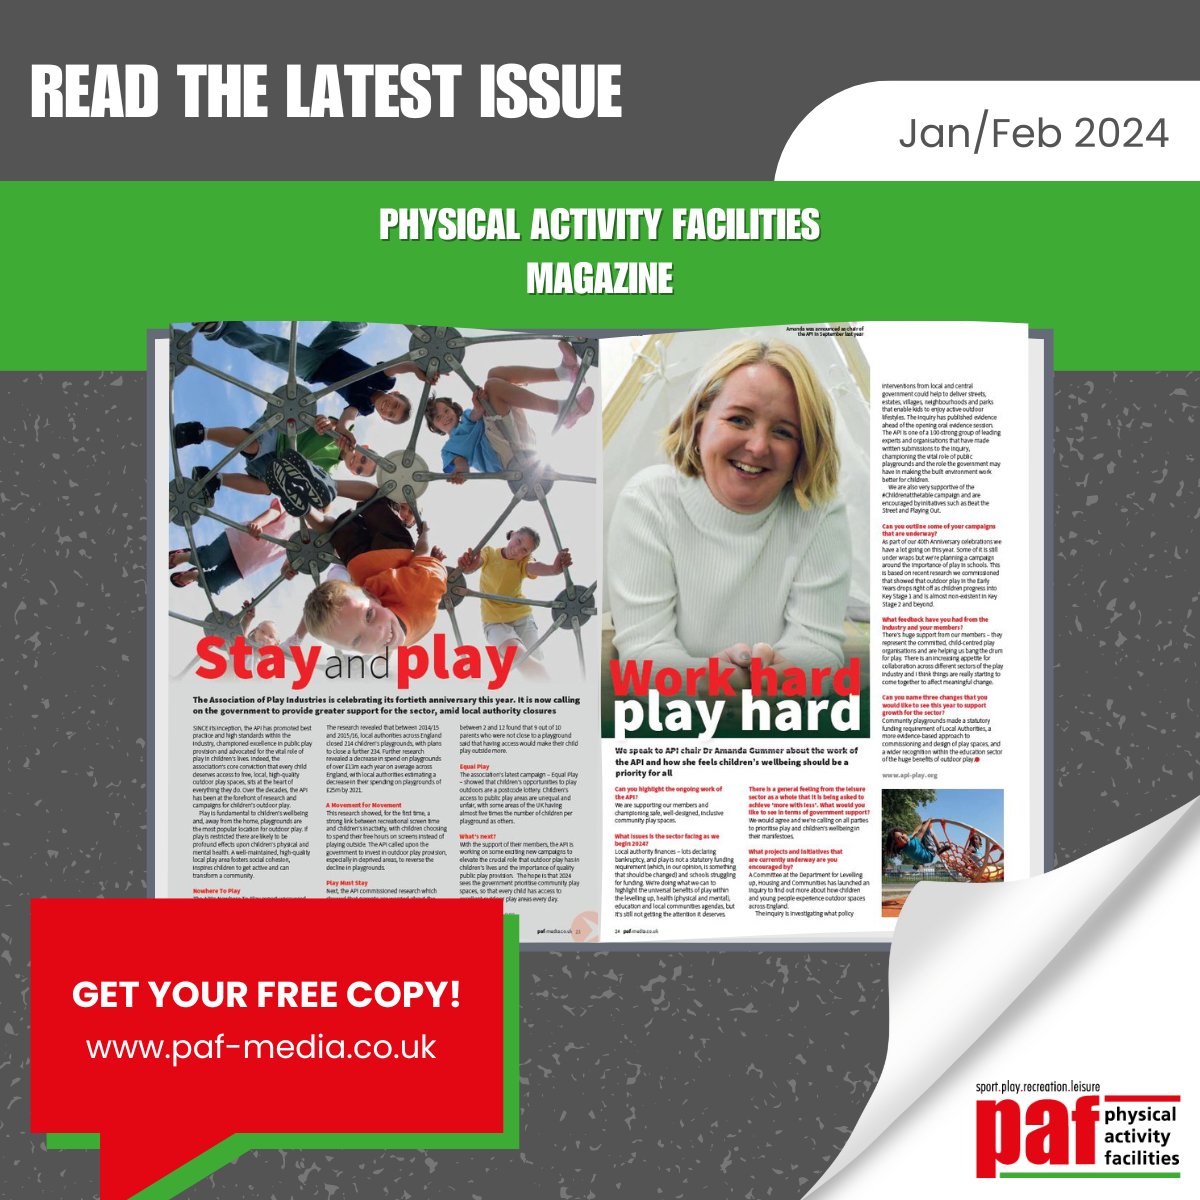 Our Jan/Feb paf magazine is available NOW!

Inside this issue:
- Sparring partners
- Projects
- Q&A
- Meetings & mountains

Read it here: lnkd.in/gZVmjfC8

#PAFmagazine #physicalactivity #facilities #projects  #construction #build #design #exteriordesign #interiordesign